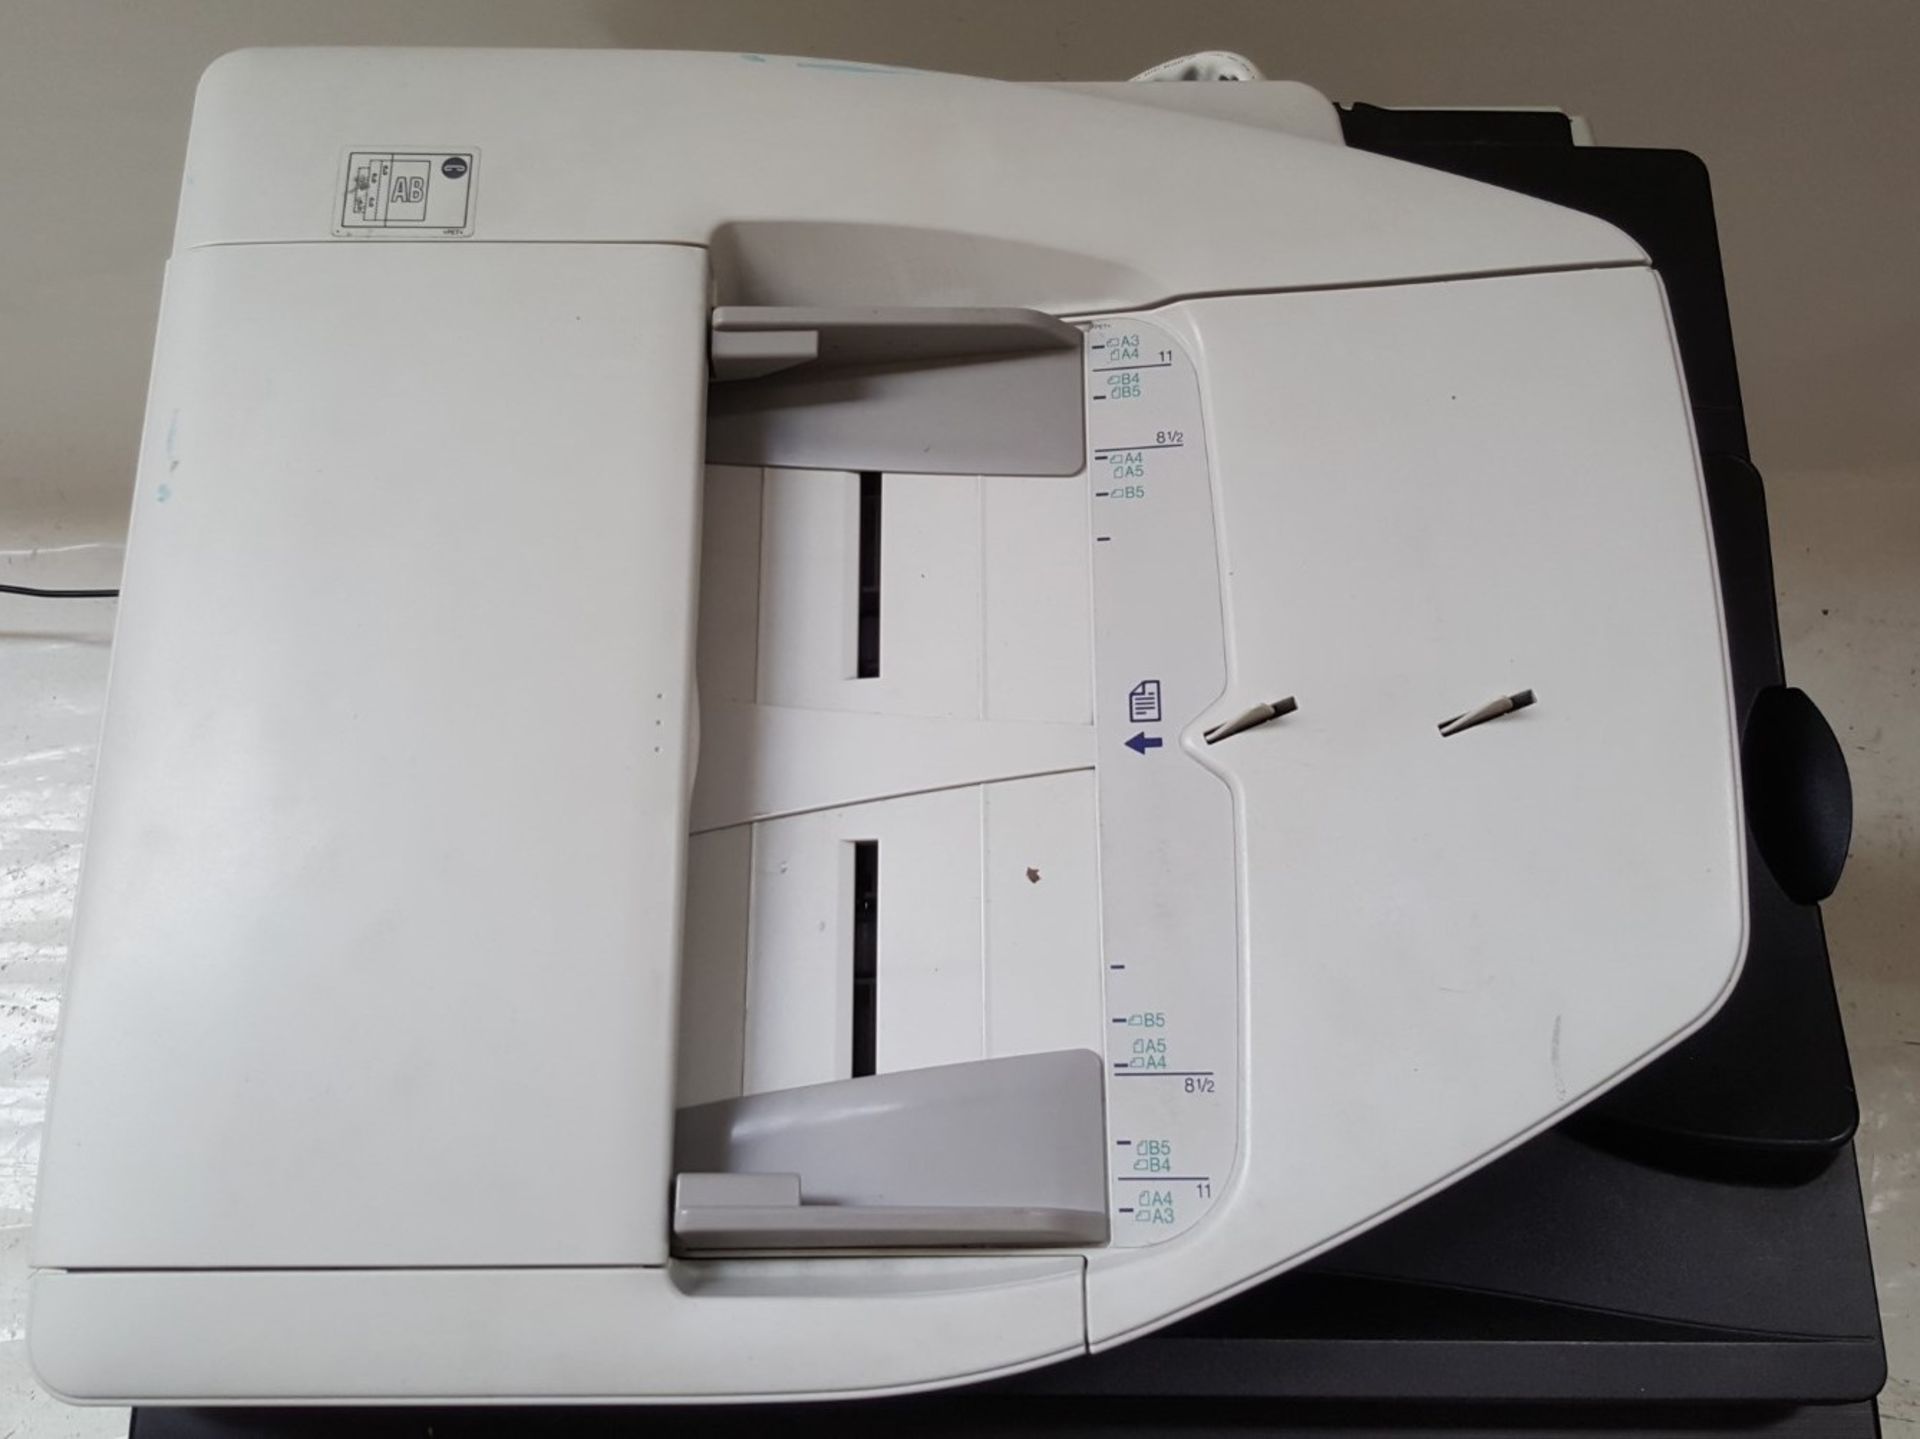 1 x Sharp MX-5112N Digital Copier Office Printer - Tested and Working - Ref CQ253 - CL422 - - Image 6 of 7